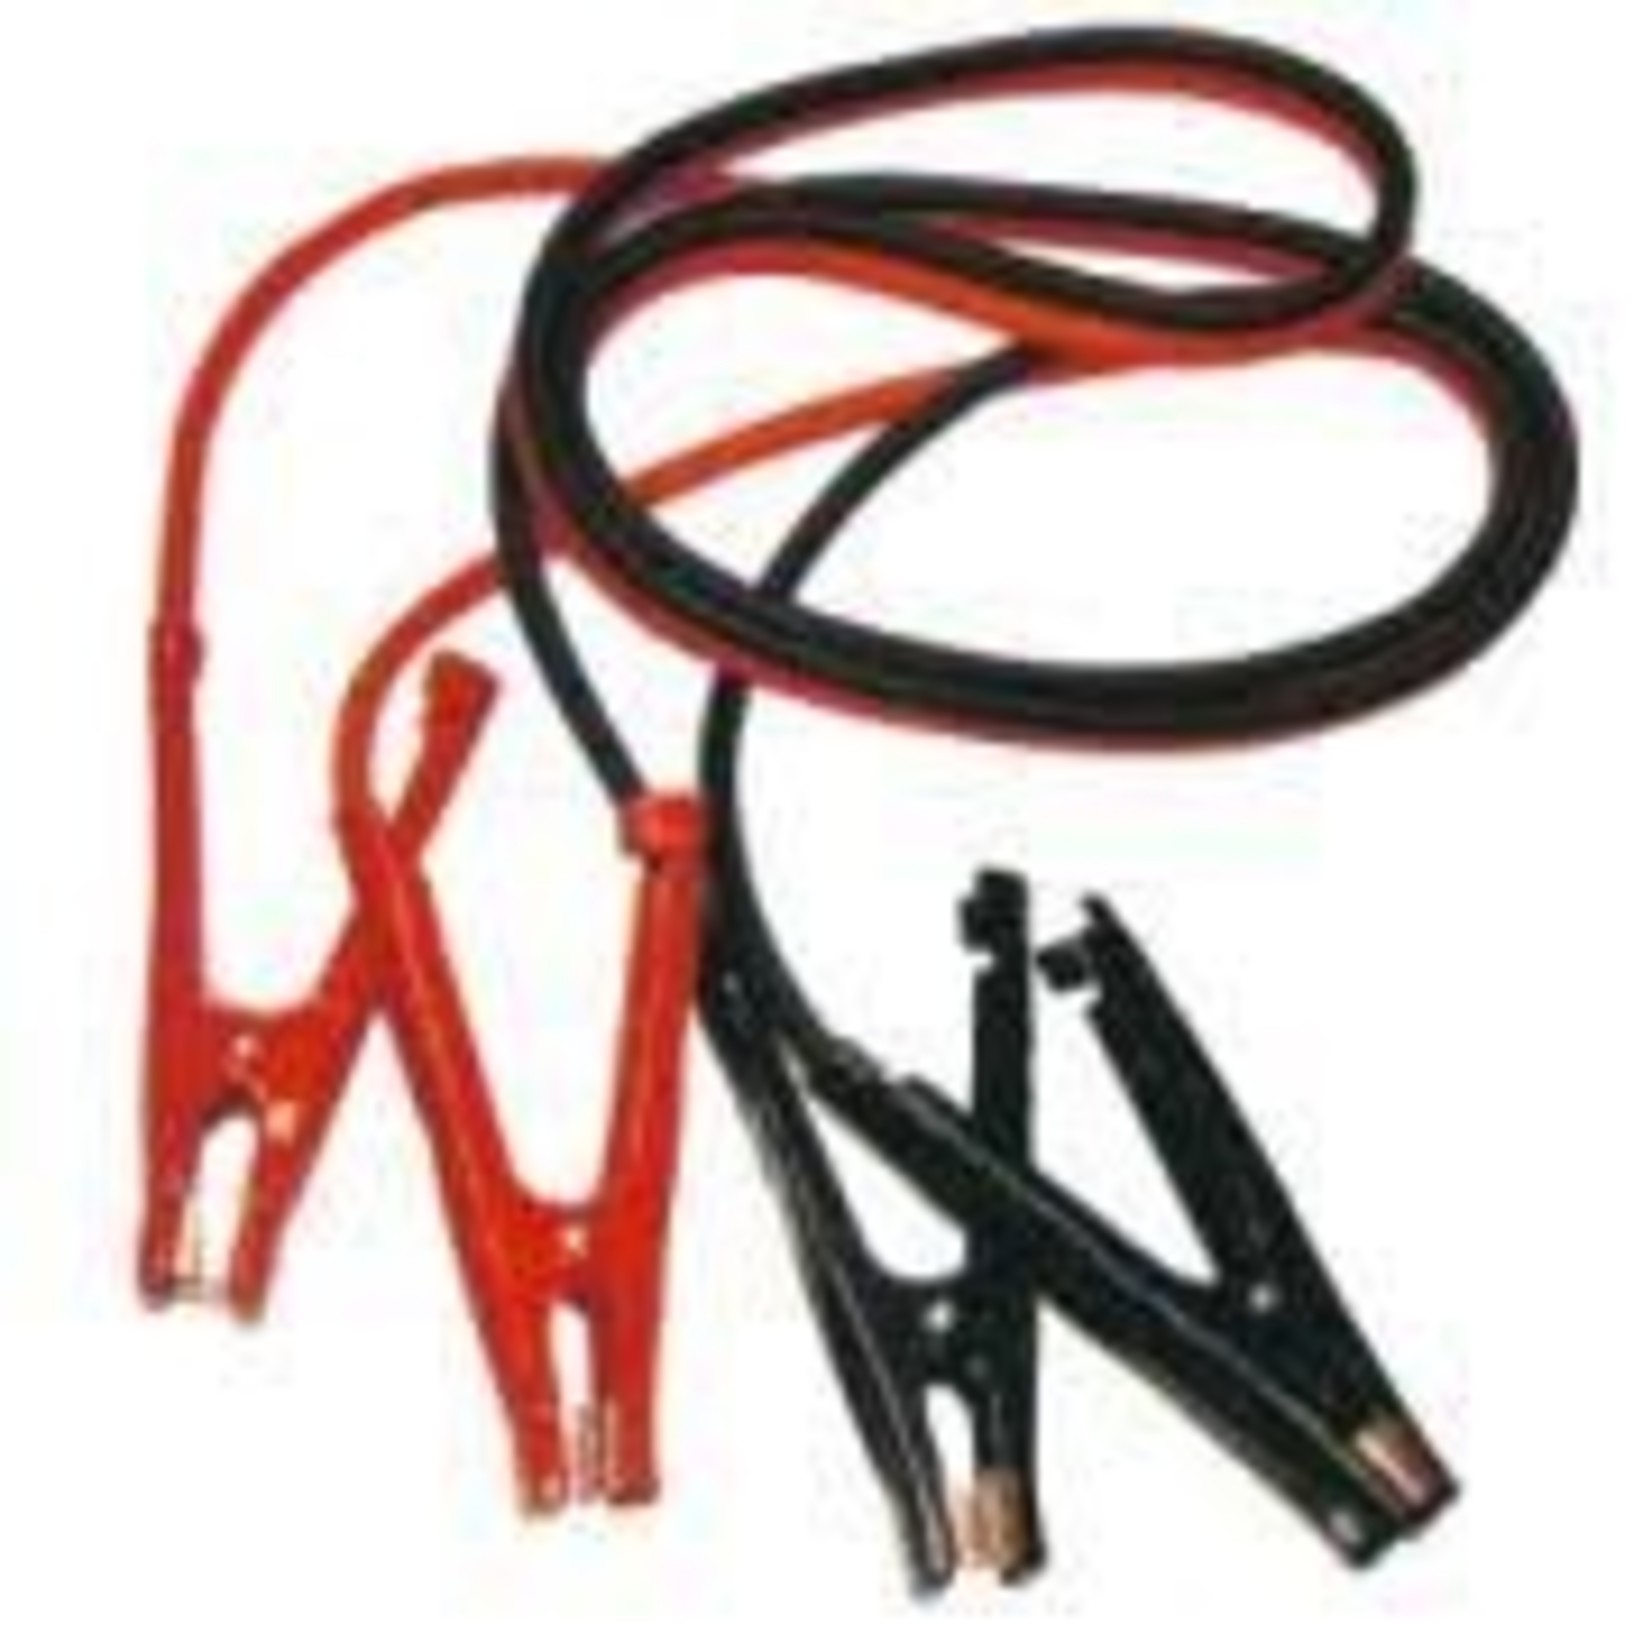 BOOSTER CABLES 8-GAUGE/12FT